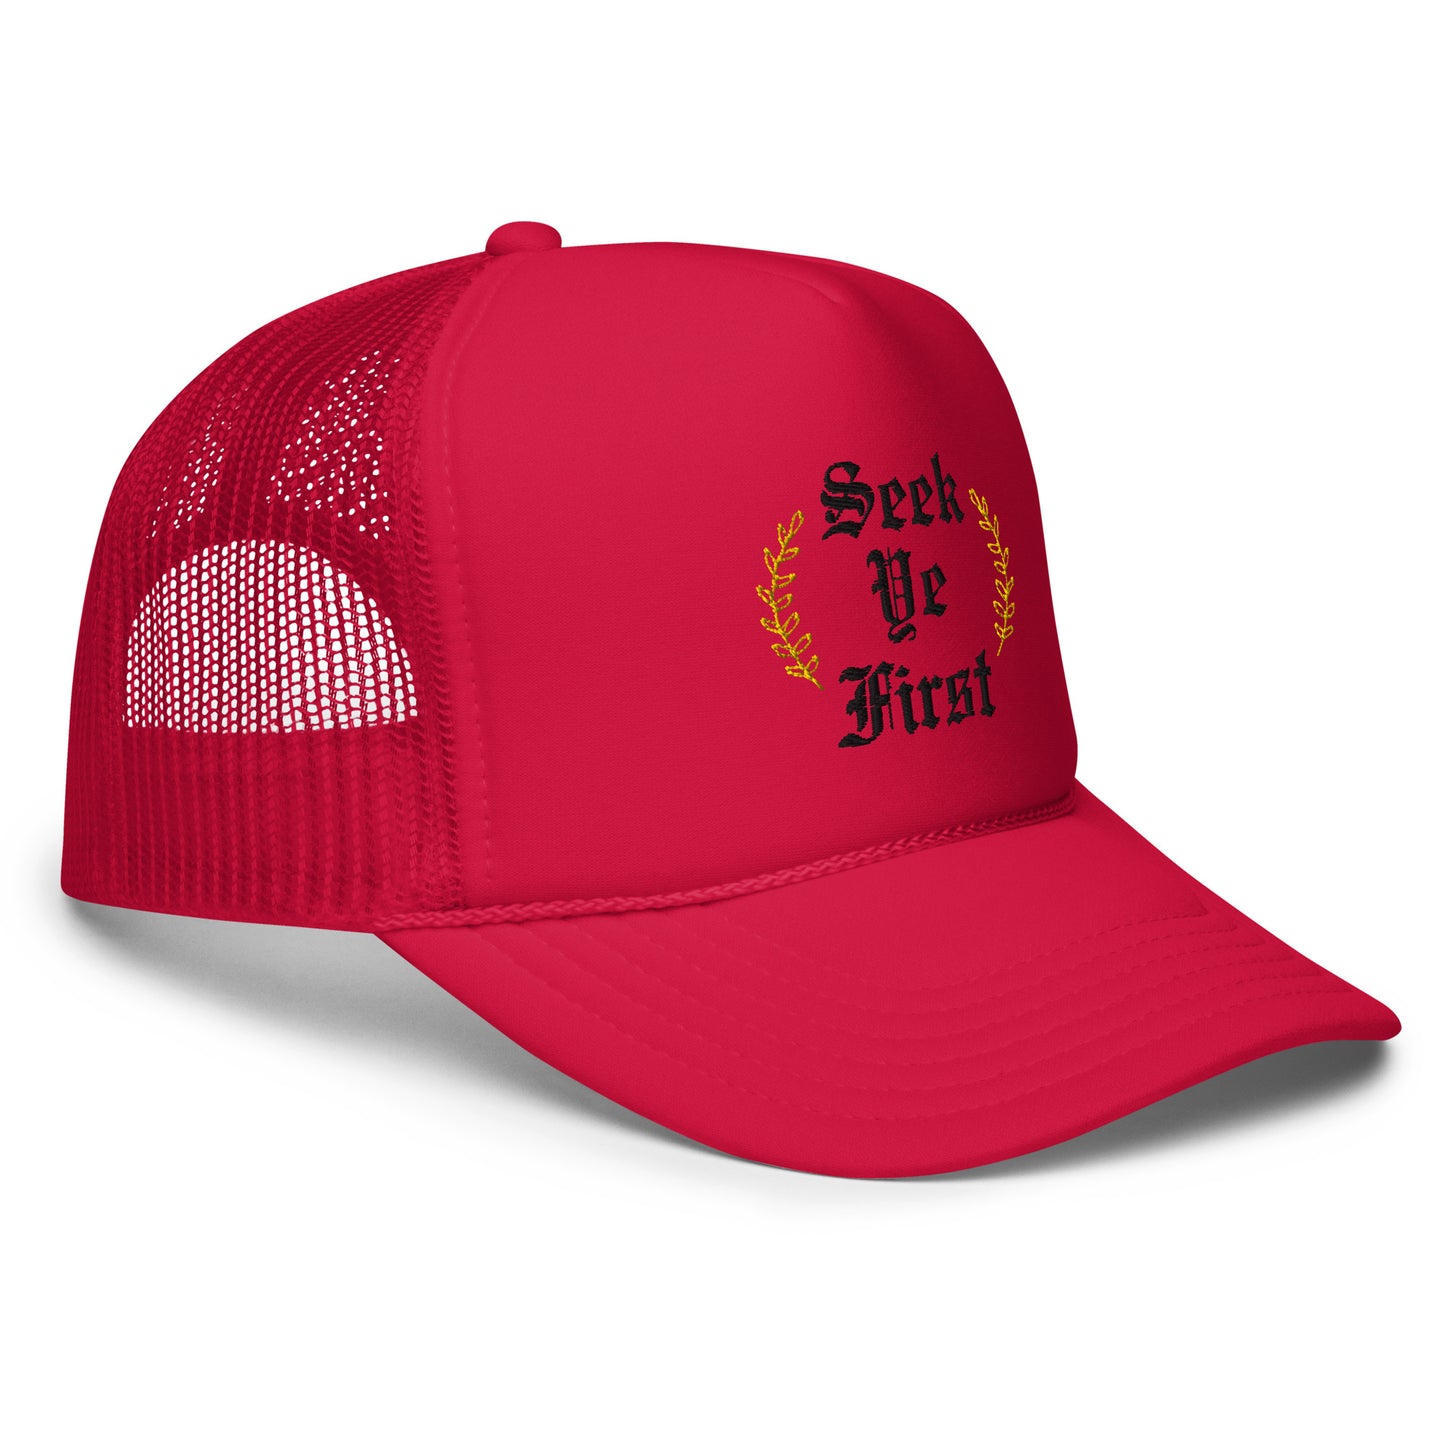 Old English Trucker Hat - Red